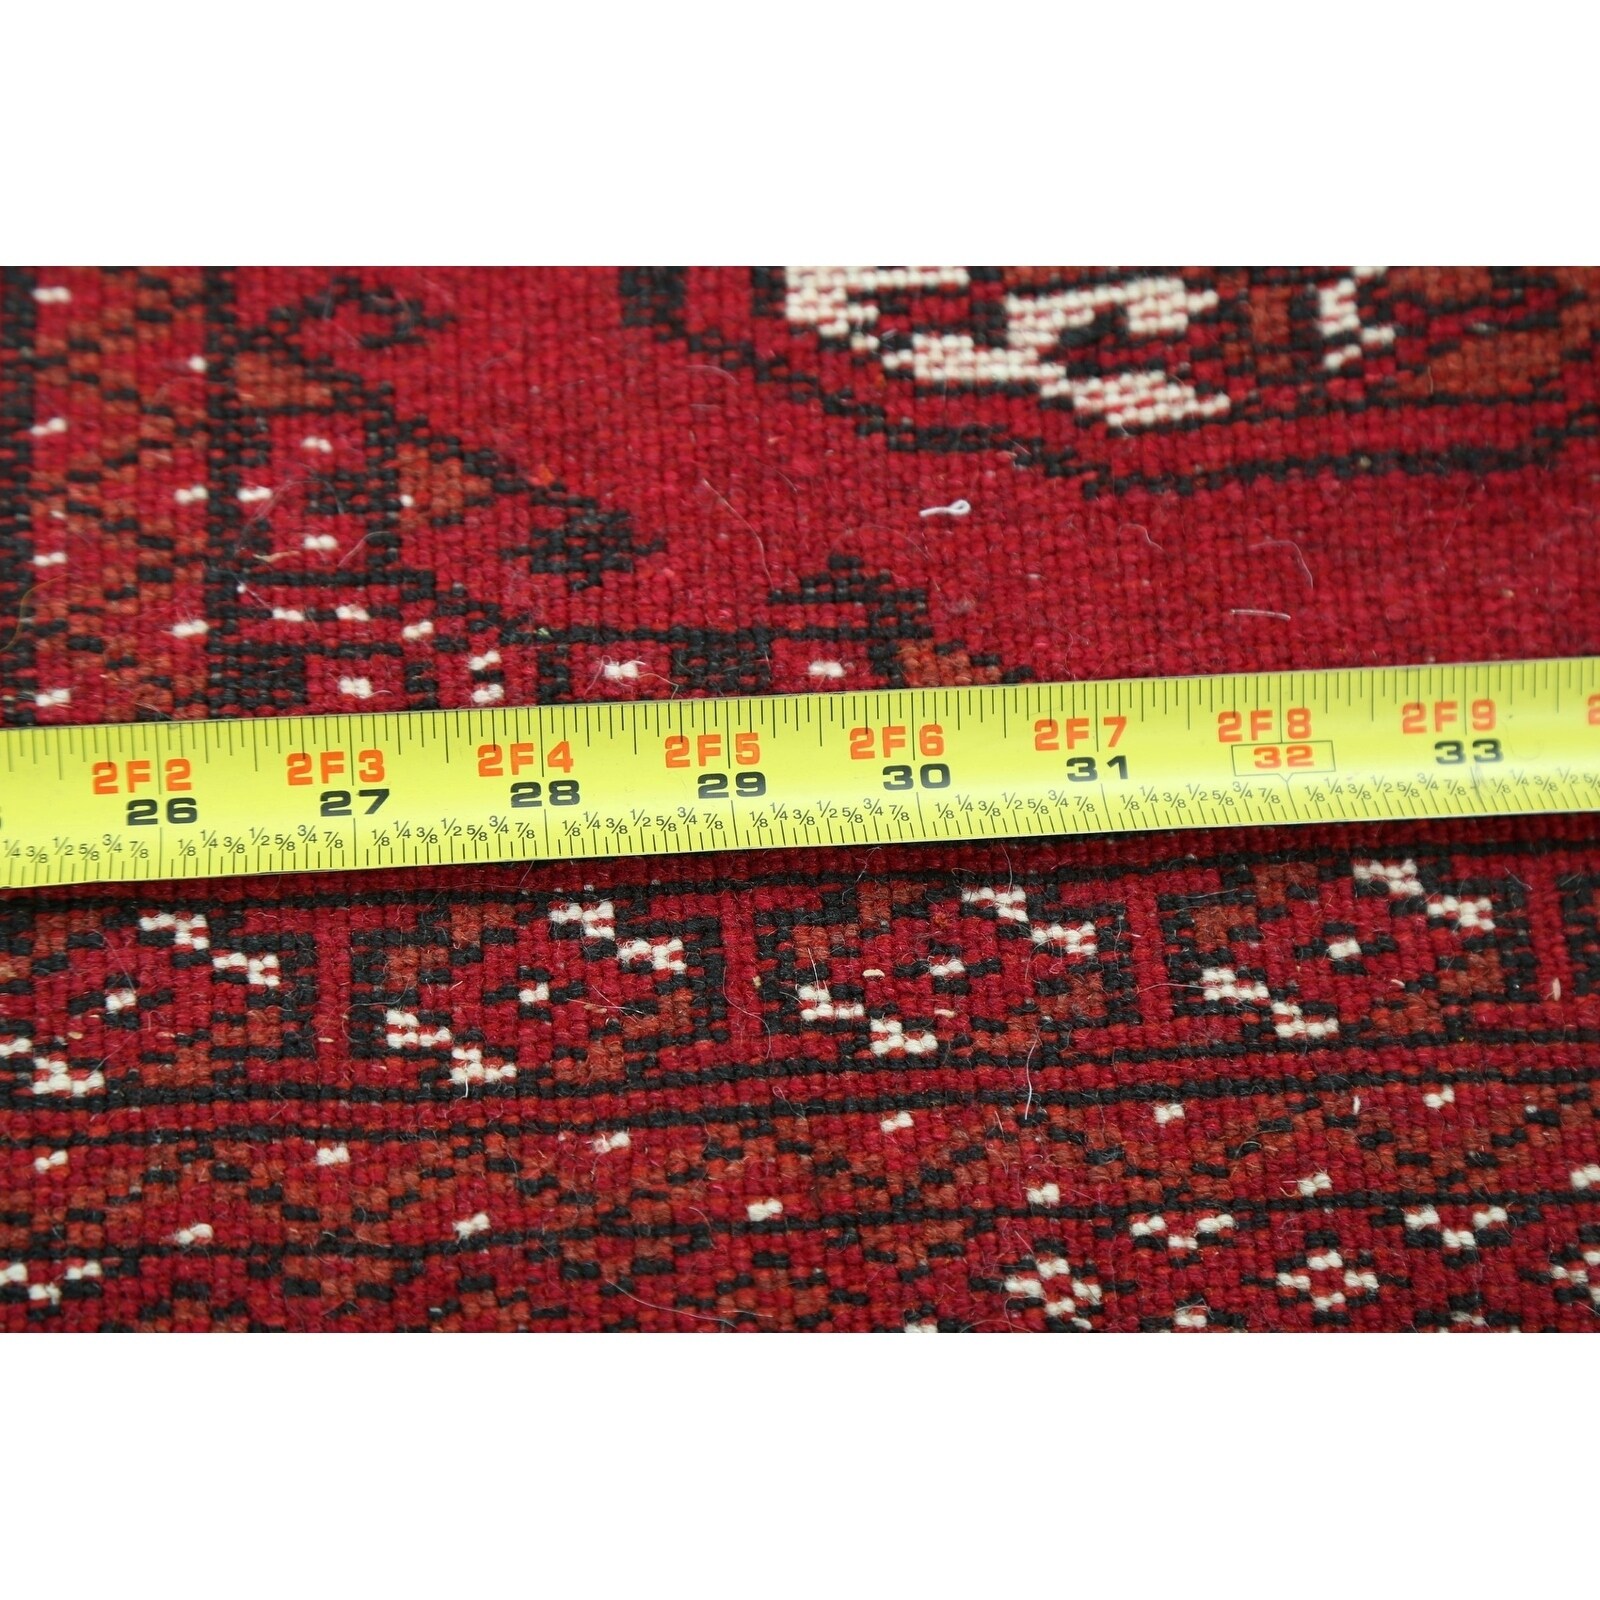 Geometric Red Bokhara Oriental Hallway Runner Rug Hand-Knotted - 1'11" x 6'4"